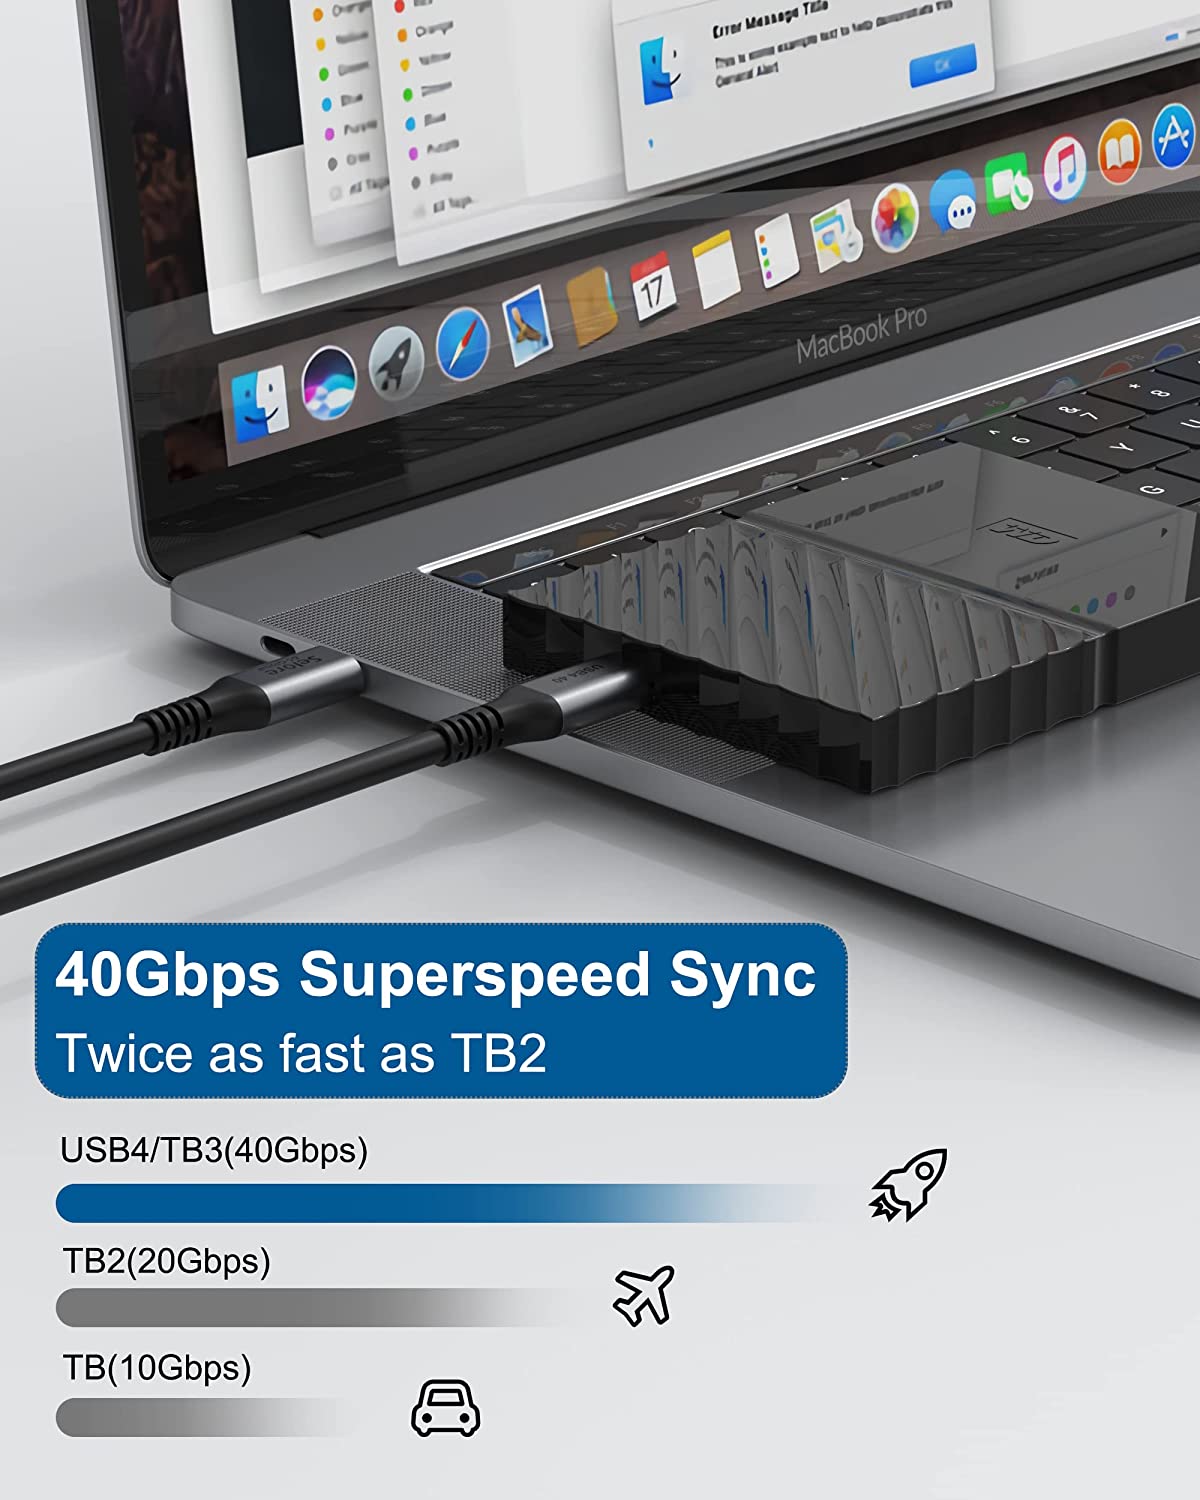 USB 4 VS Thunderbolt 4 : What Should We Know?